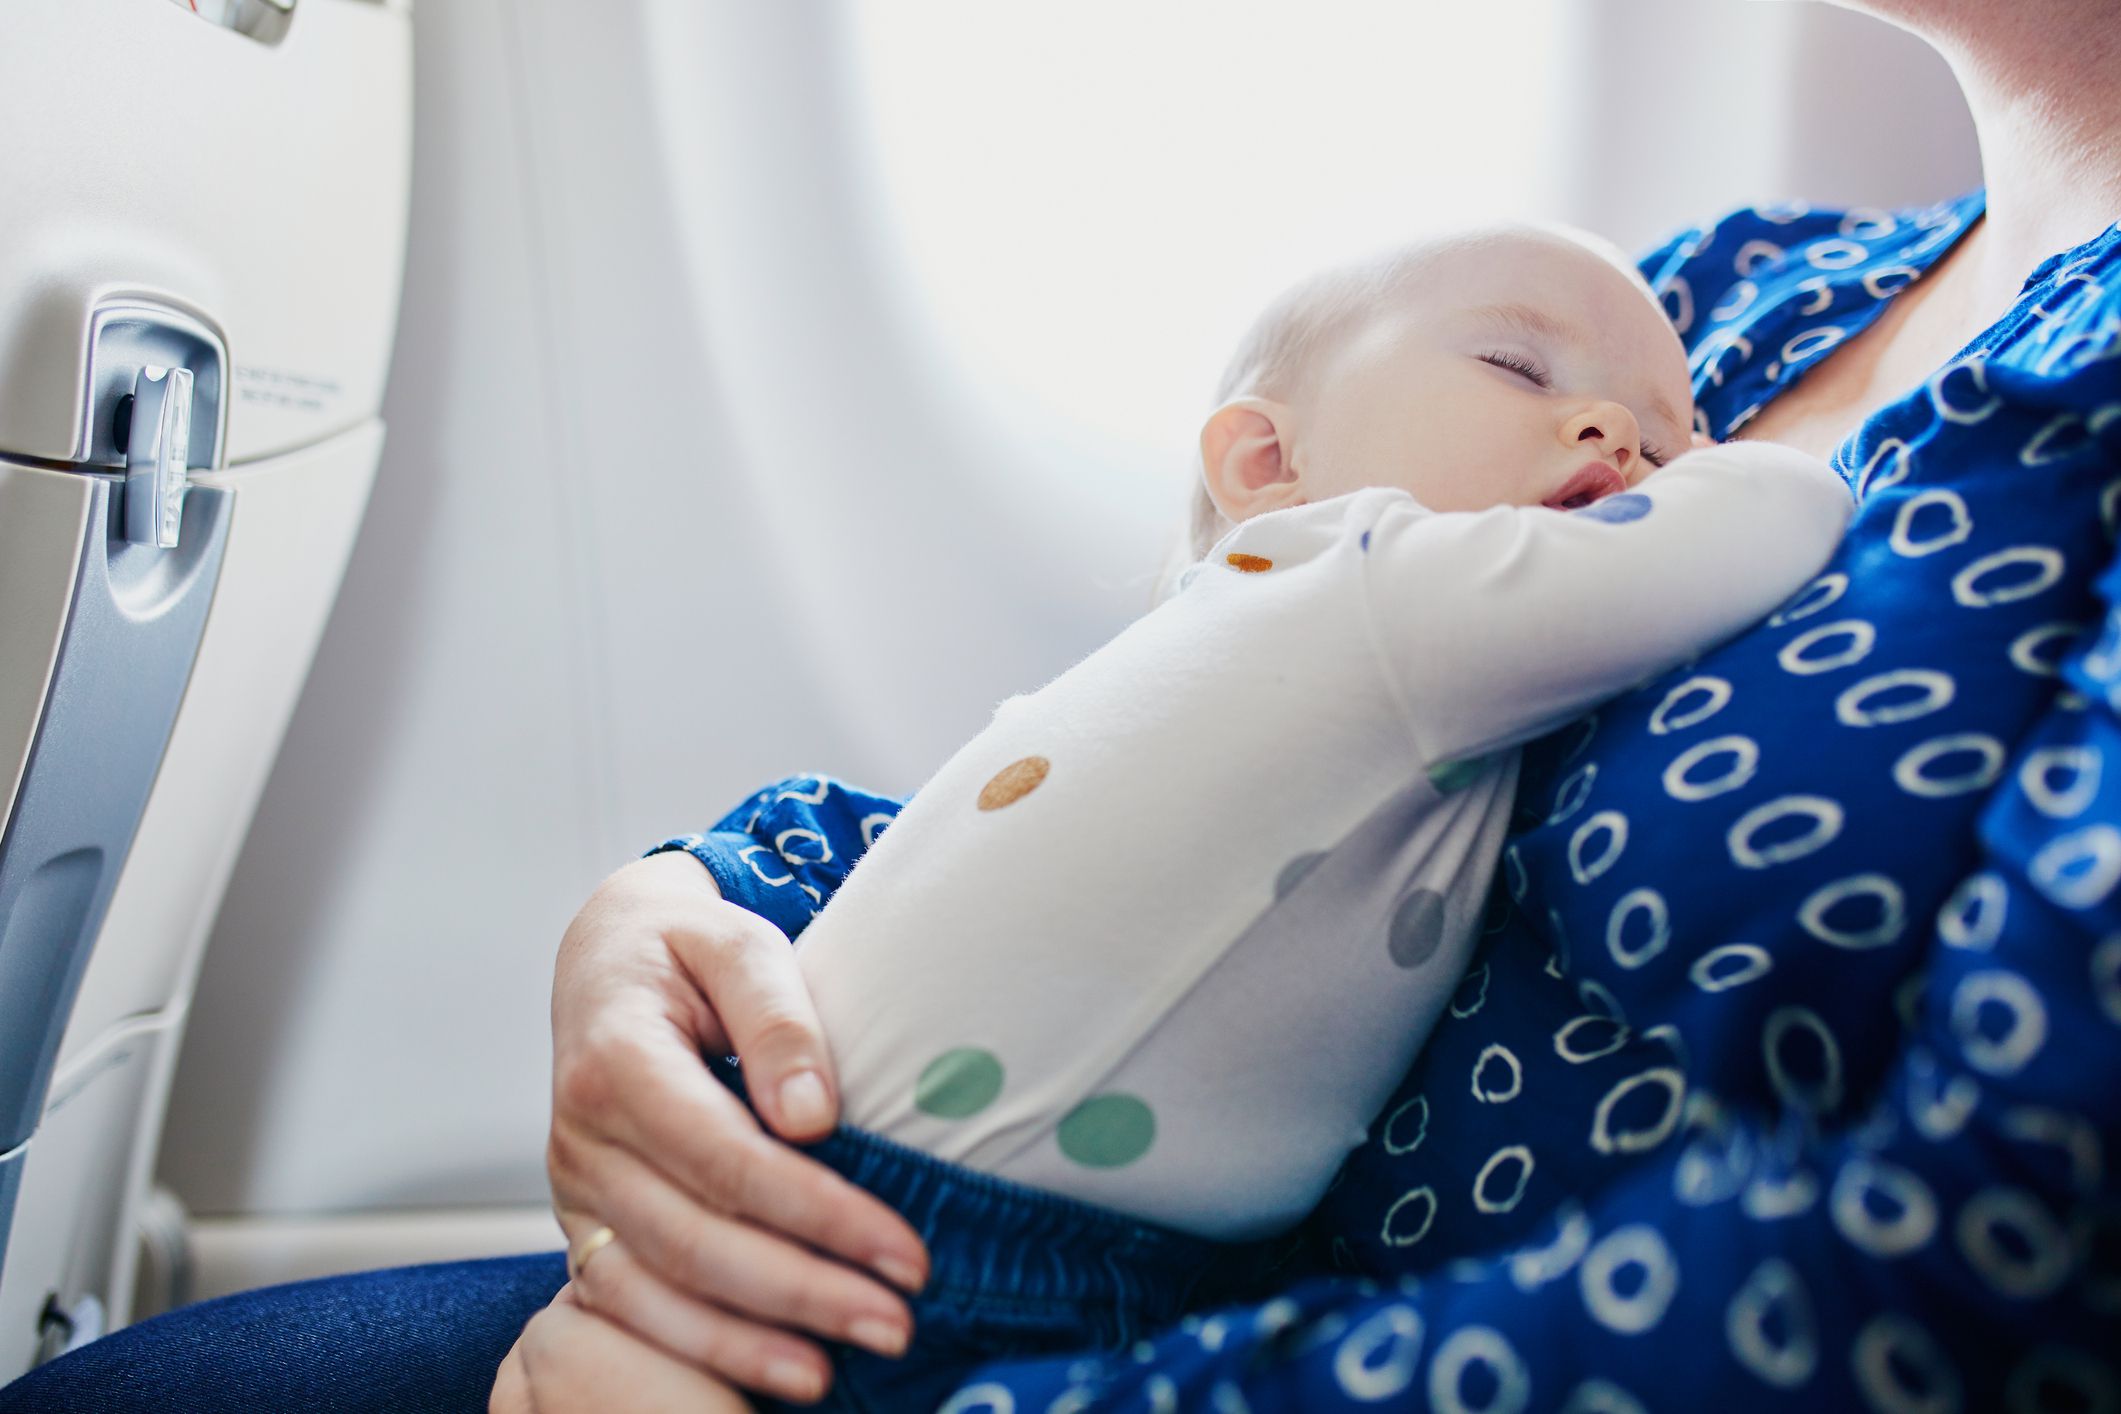 <h3>What to Bring</h3><p>The things you’ll need when traveling with a baby are not so different from what you need for a day in the park. Besides a stroller or carrier, you’ll want to make sure you’ve got enough amusements on hand to get your baby (and those around you) through the flight without much drama. I remember getting great new-parent tips from others about flying, including the advice to bring a small bag stuffed with distractions: board books, her Sophie the Giraffe teether, a light-up rattle. It was an excellent idea, even though she wound up happily playing with an empty plastic water bottle for much of our time in the air — anything that works!</p><p>If you’ve got a toddler who likes to snack, have plenty of their favorites with you (for yourself, too, as they’re not the only one who needs to be distracted from grumpiness). Other useful items to bring in your carry-on: plenty of diapers, wipes, a travel diaper pad to use in the cramped bathroom (not fun), formula, and a small cozy blanket.</p><h4>Dealing With Air Pressure Changes</h4><p>When flying with a baby, take-off and landing are likely to be the toughest parts, due to air-pressure changes in the cabin that can plug up their little ears. Start breastfeeding or bottle-feeding a few minutes before the actual take-off or landing. The sucking and swallowing actions will help their ears keep popping. Your little one will be blissfully unaware that they’re supposed to start screaming.</p>